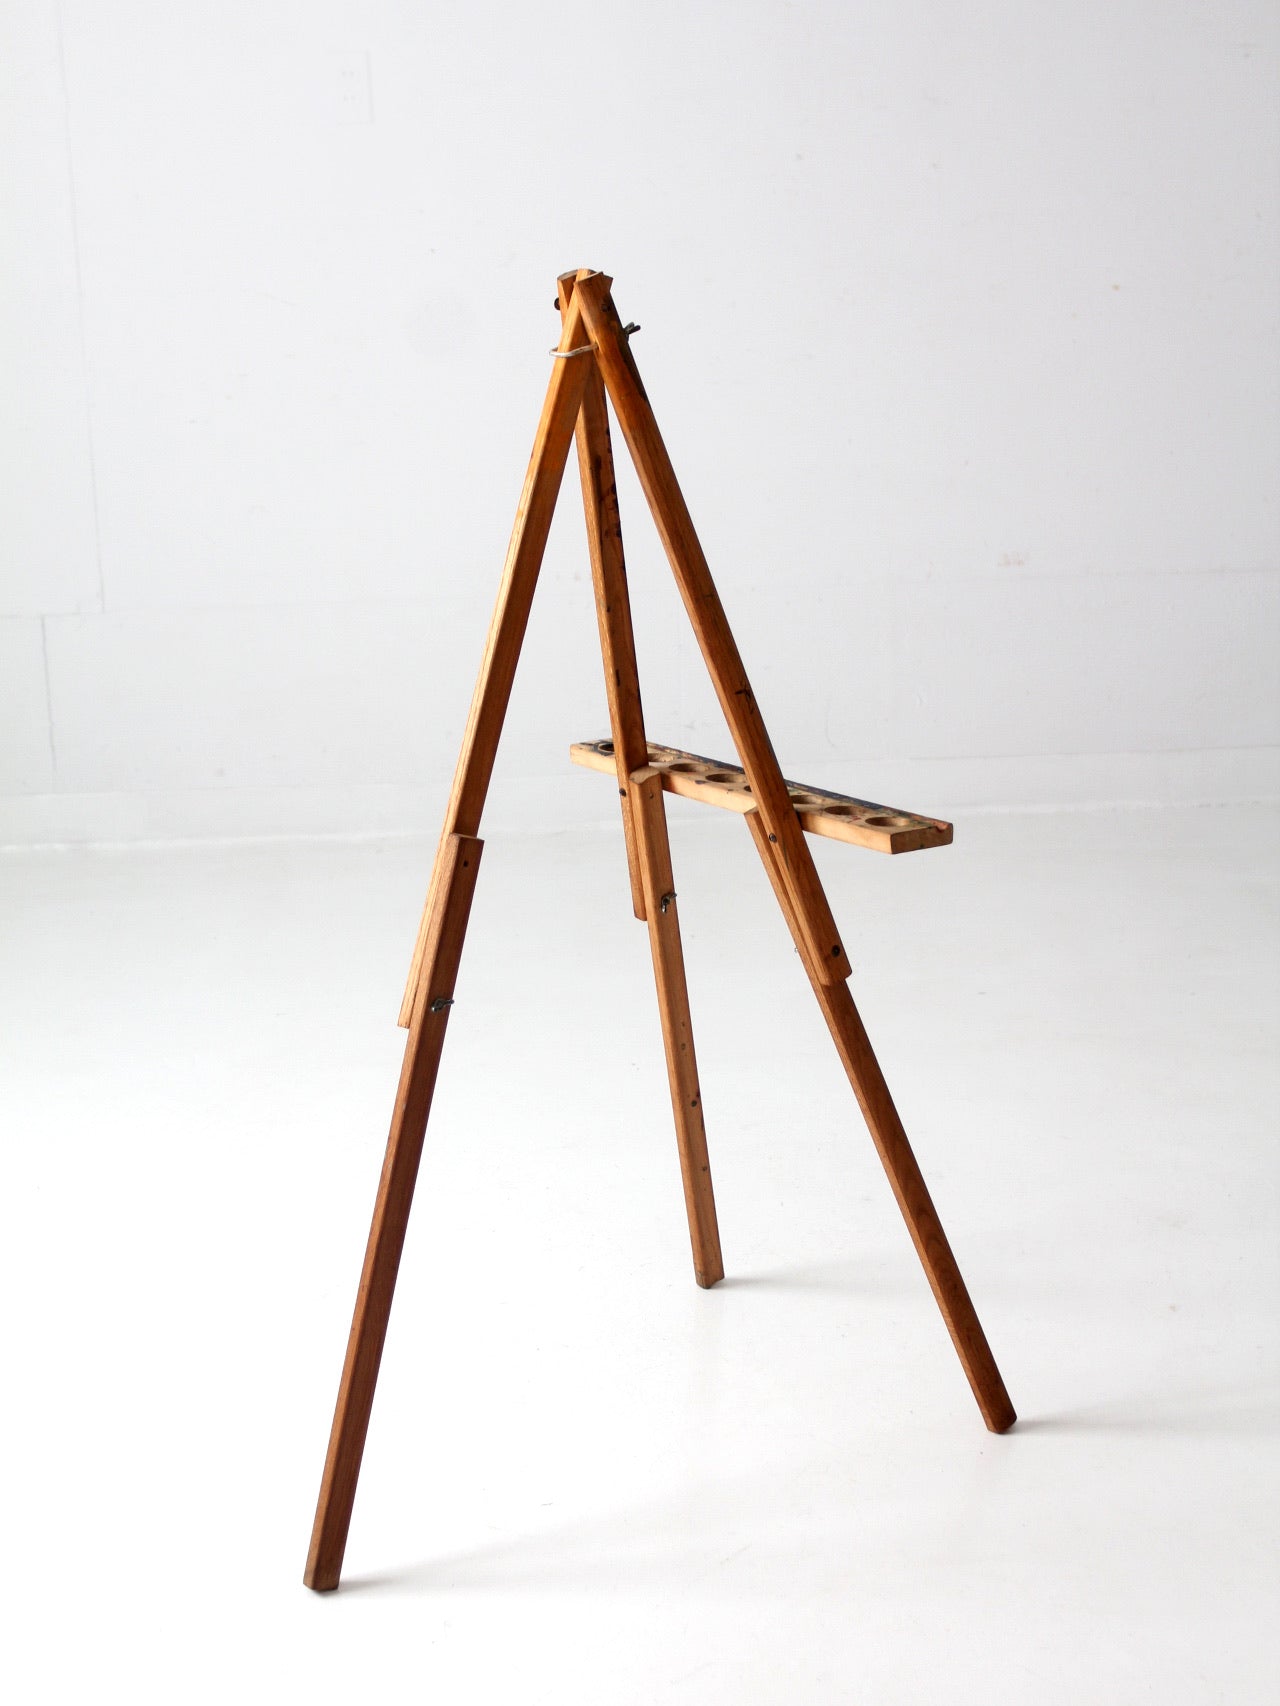 Ginger Ray Mini Wood Easels - Vintage Affair